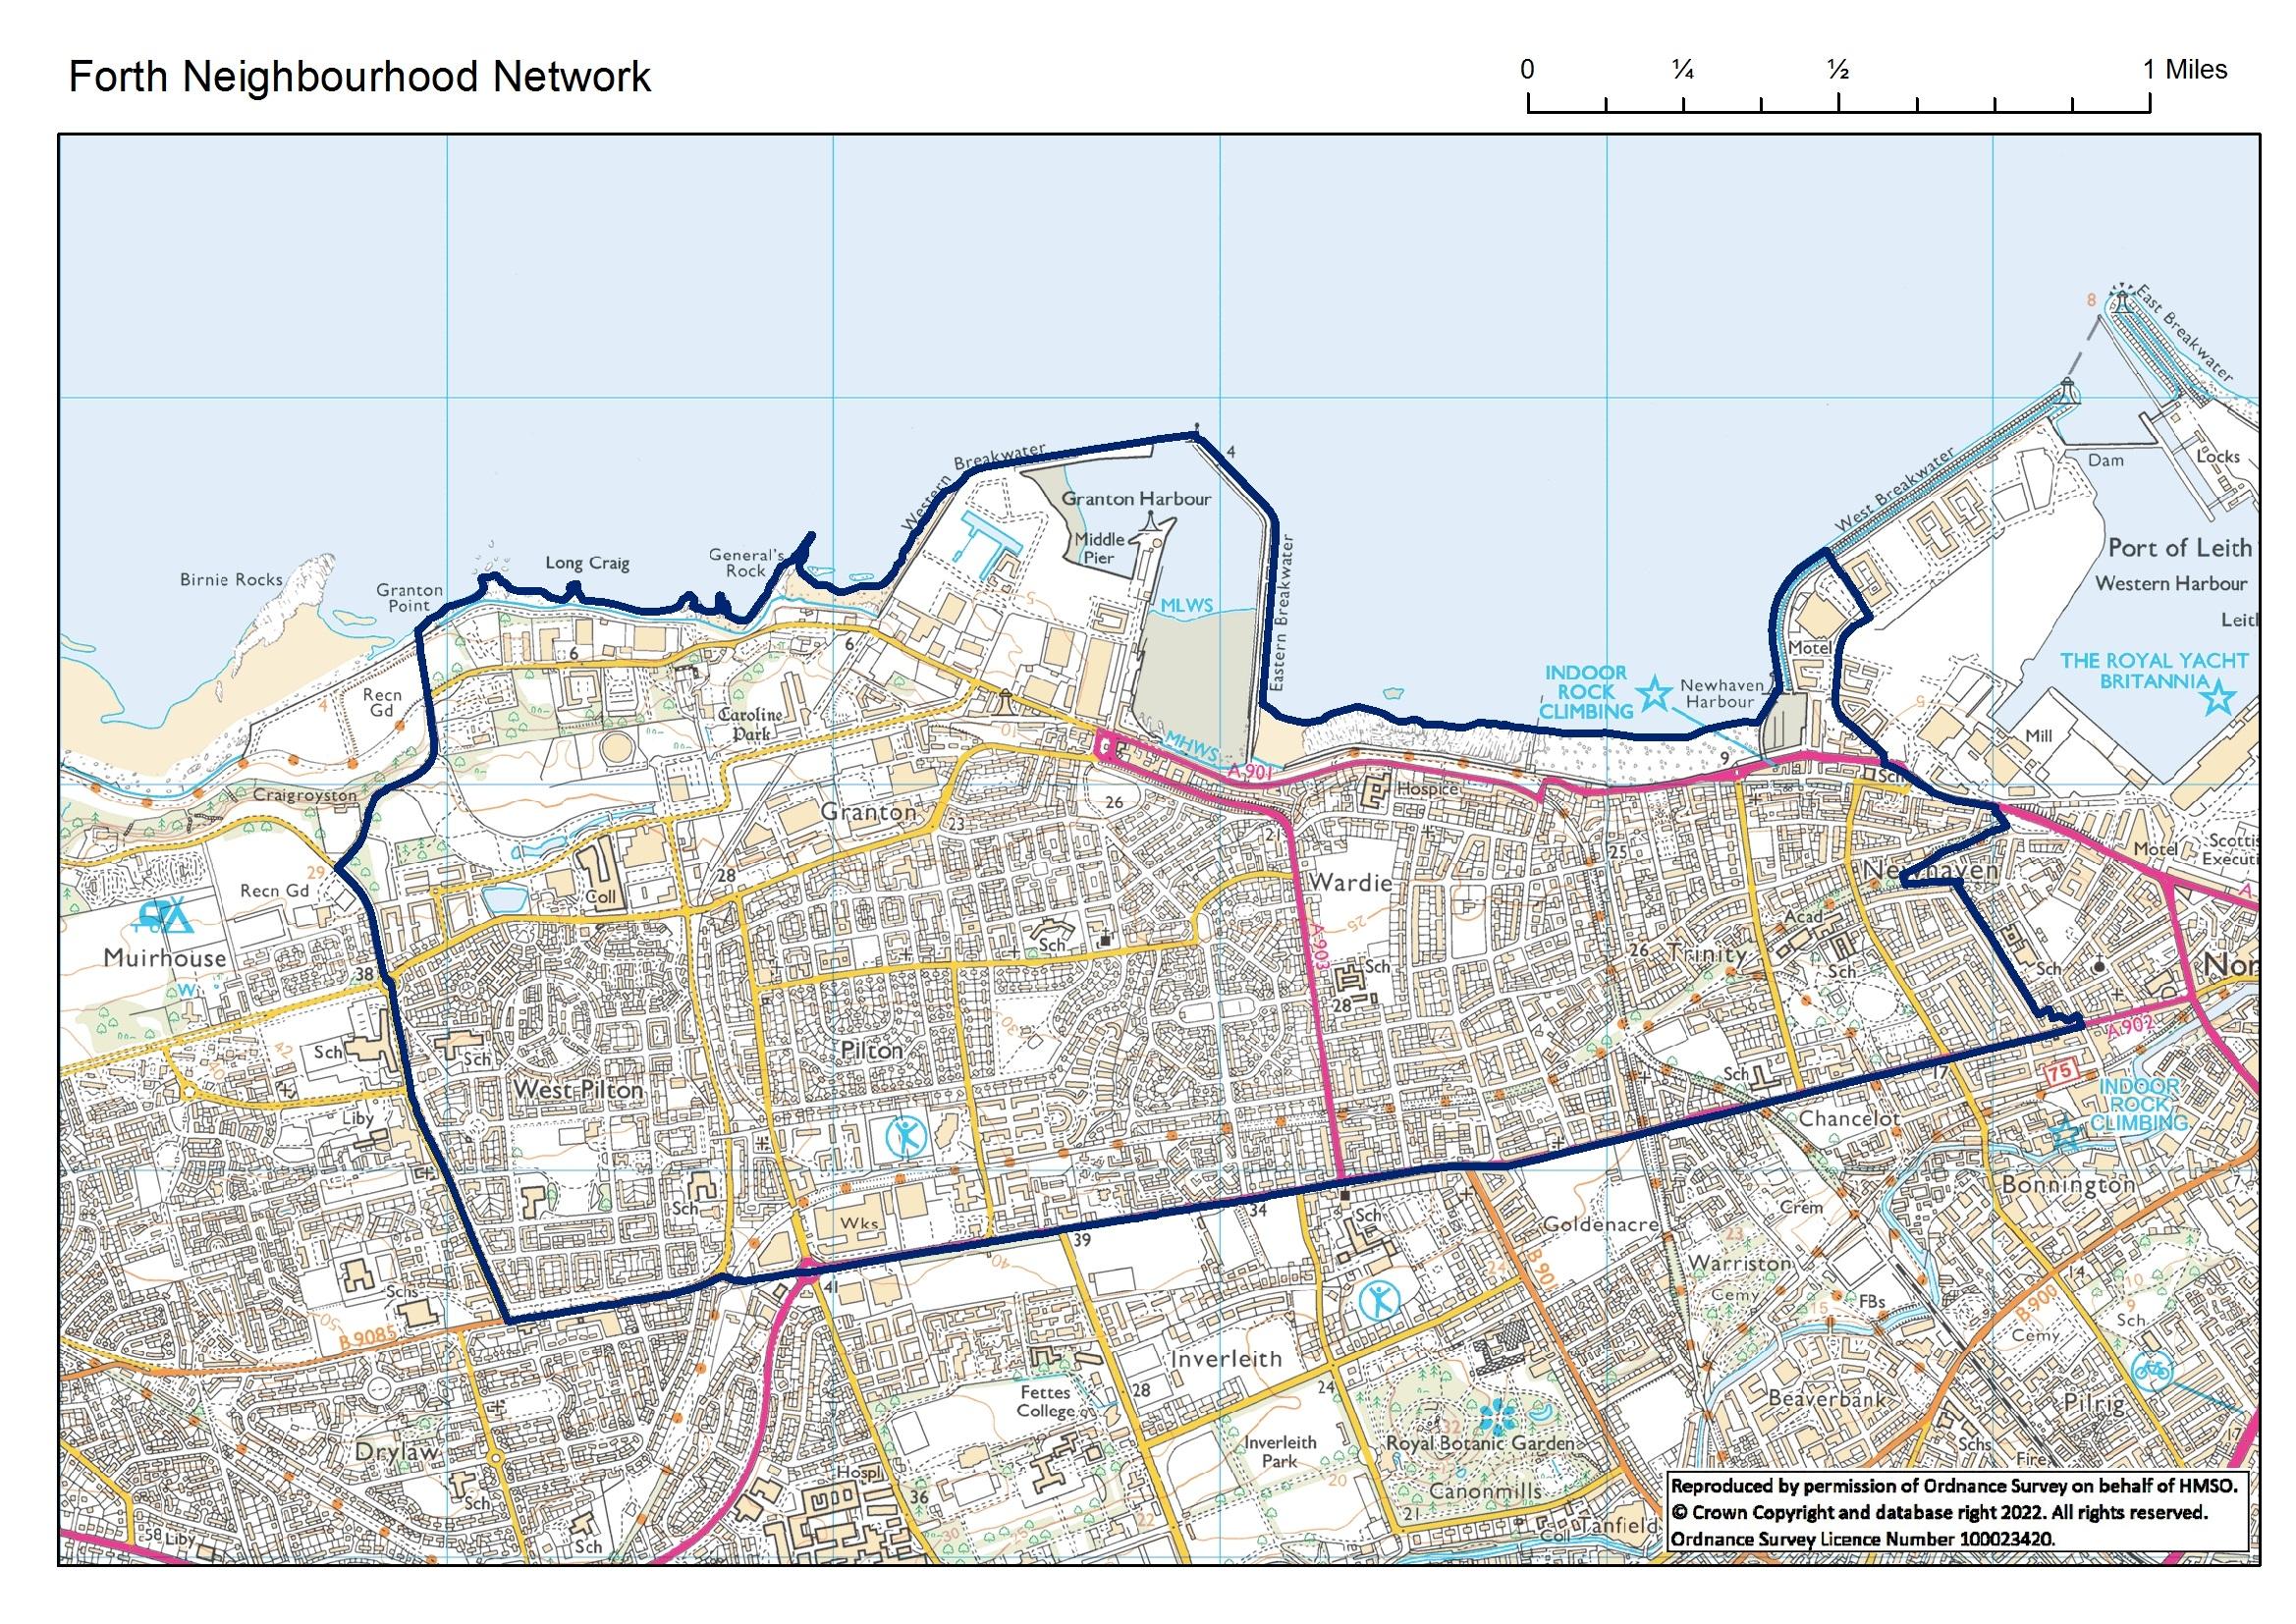 A map of the Forth Neighbourhood Network boundary area